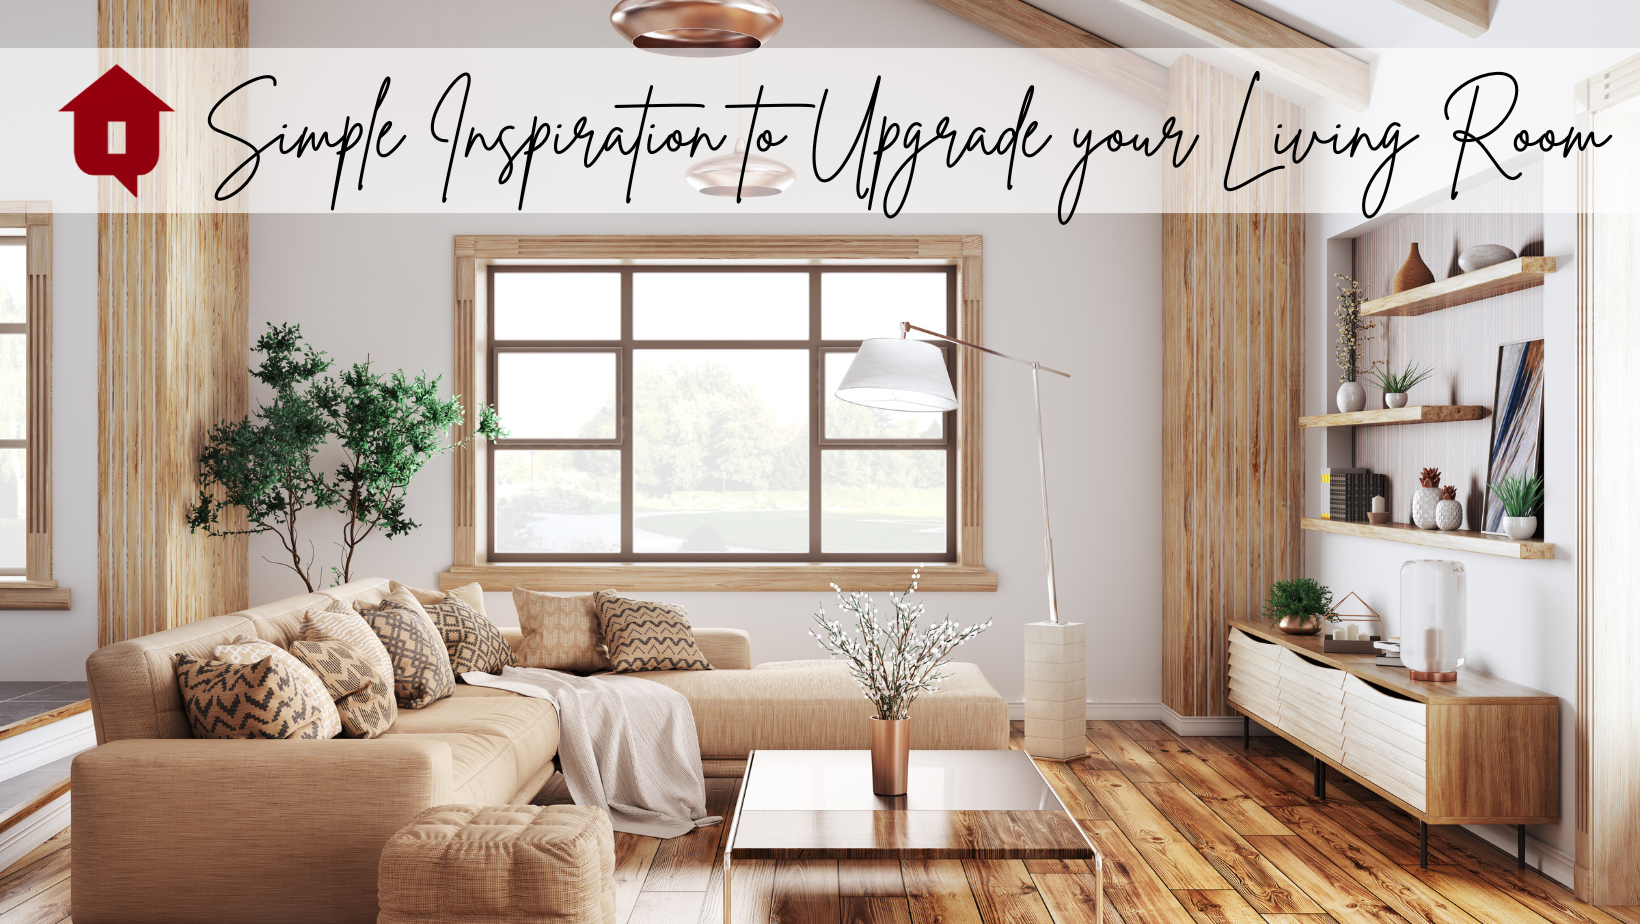 Simple Inspiration to Upgrade your Living Room